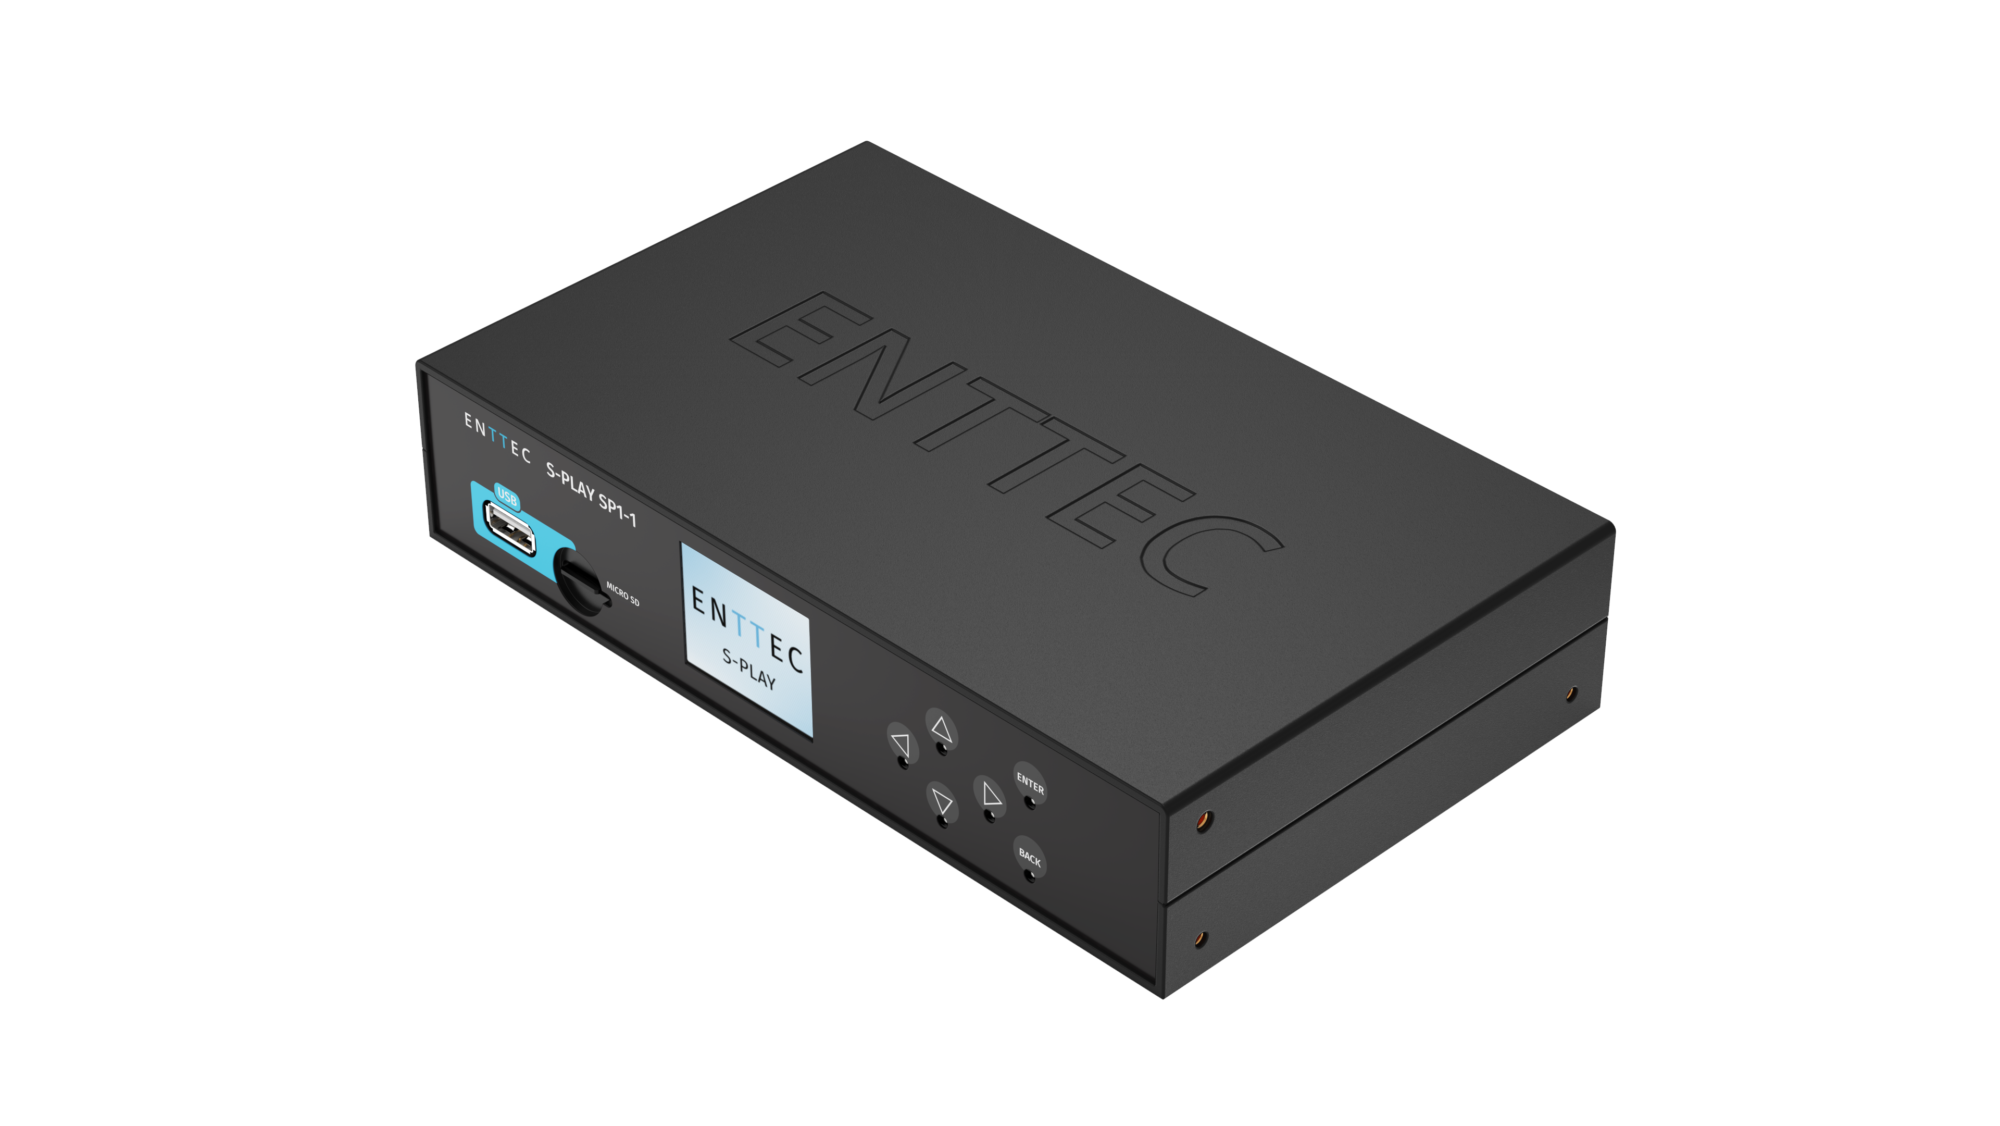 ENTTEC S-Play DMX, ArtNet and sACN lighting controller with show creation and record functionality.
smart light controller